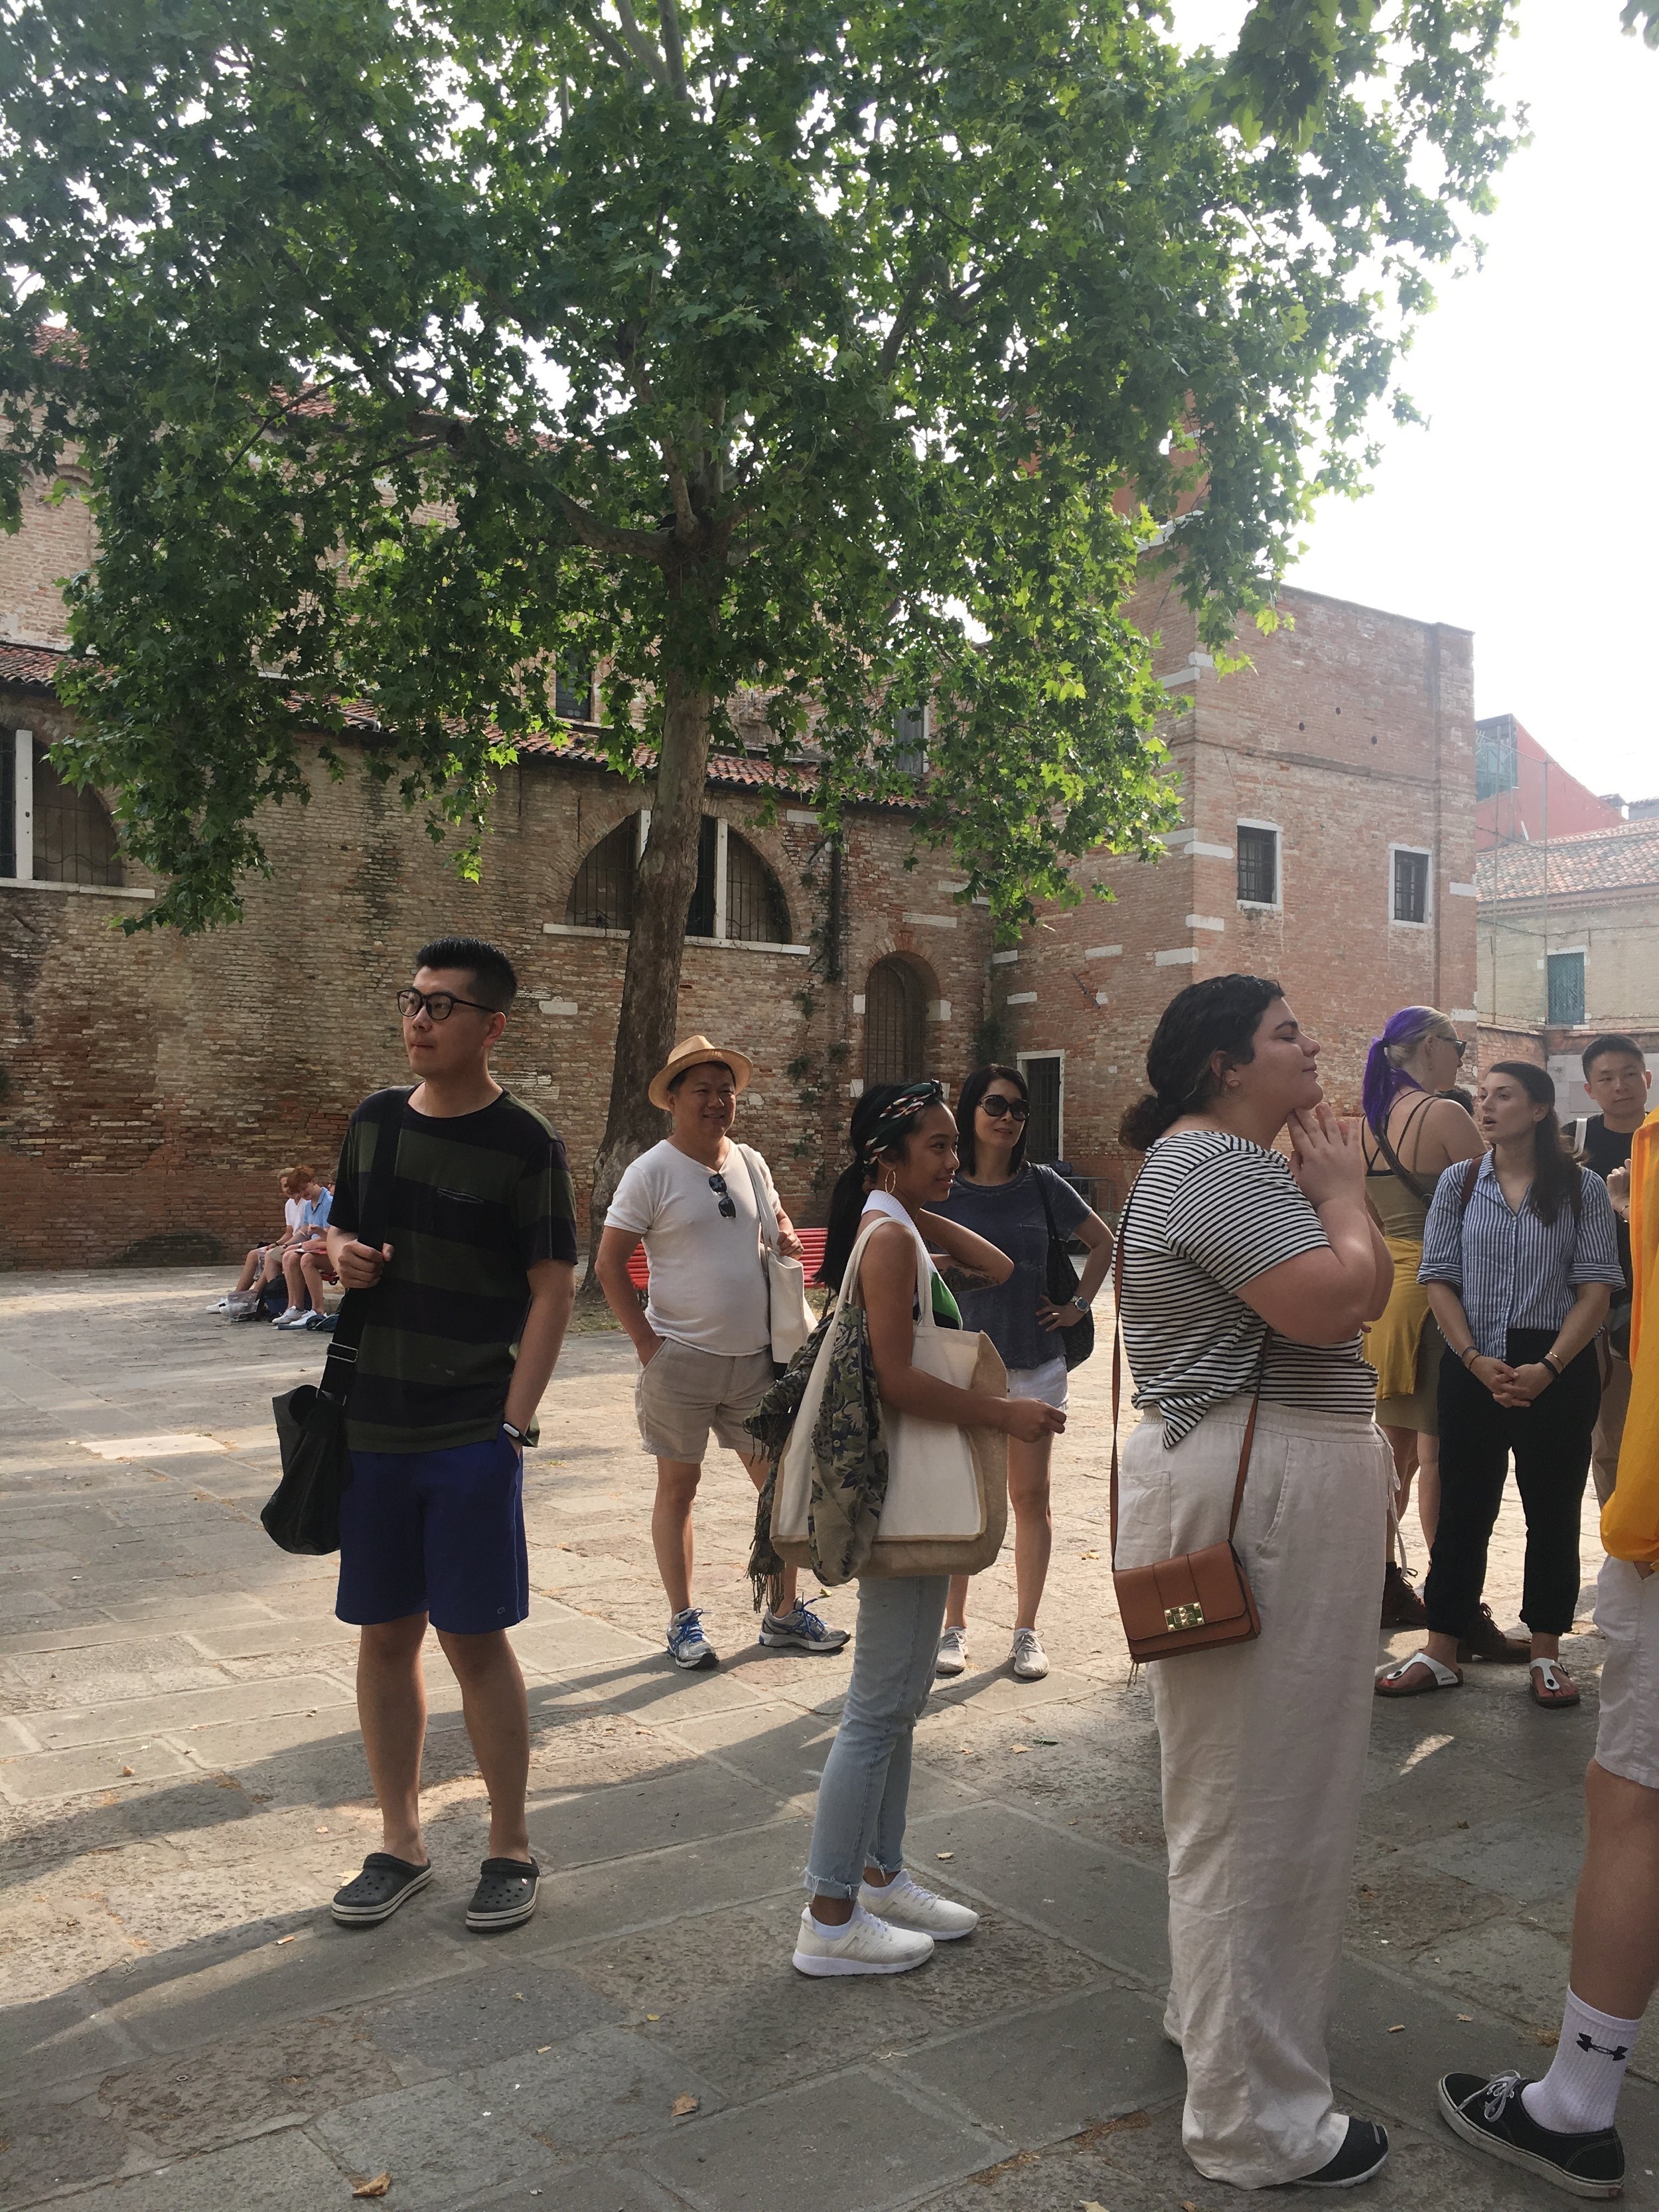 Penghui is pictured here during the first walking tour orientation